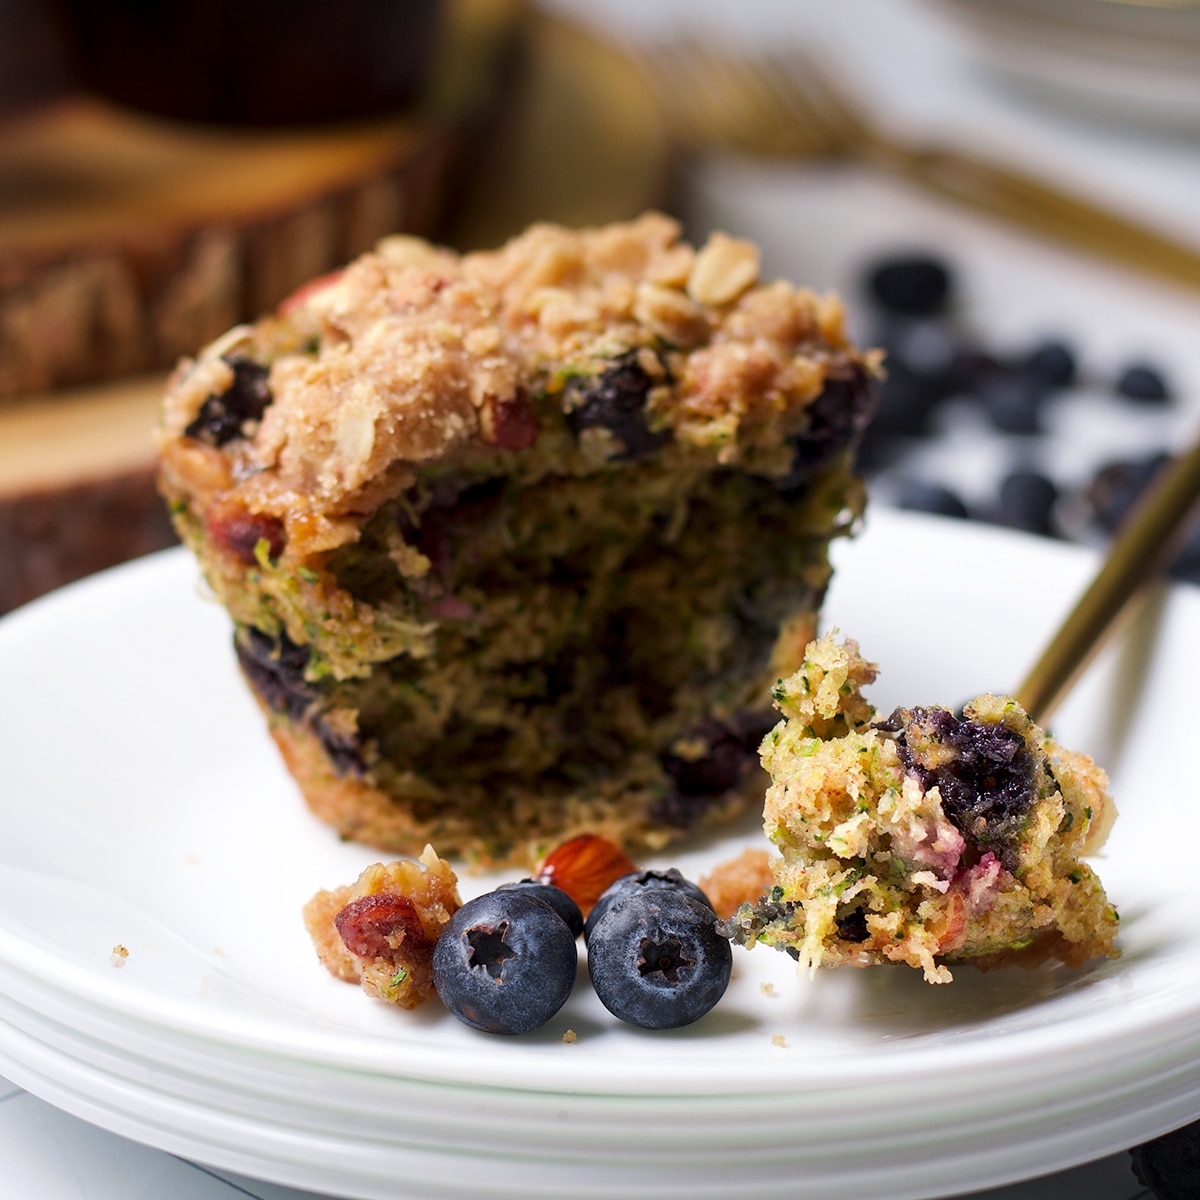 Someone using a fork to cut a bite of zucchini blueberry muffin from a muffin on a white plate.